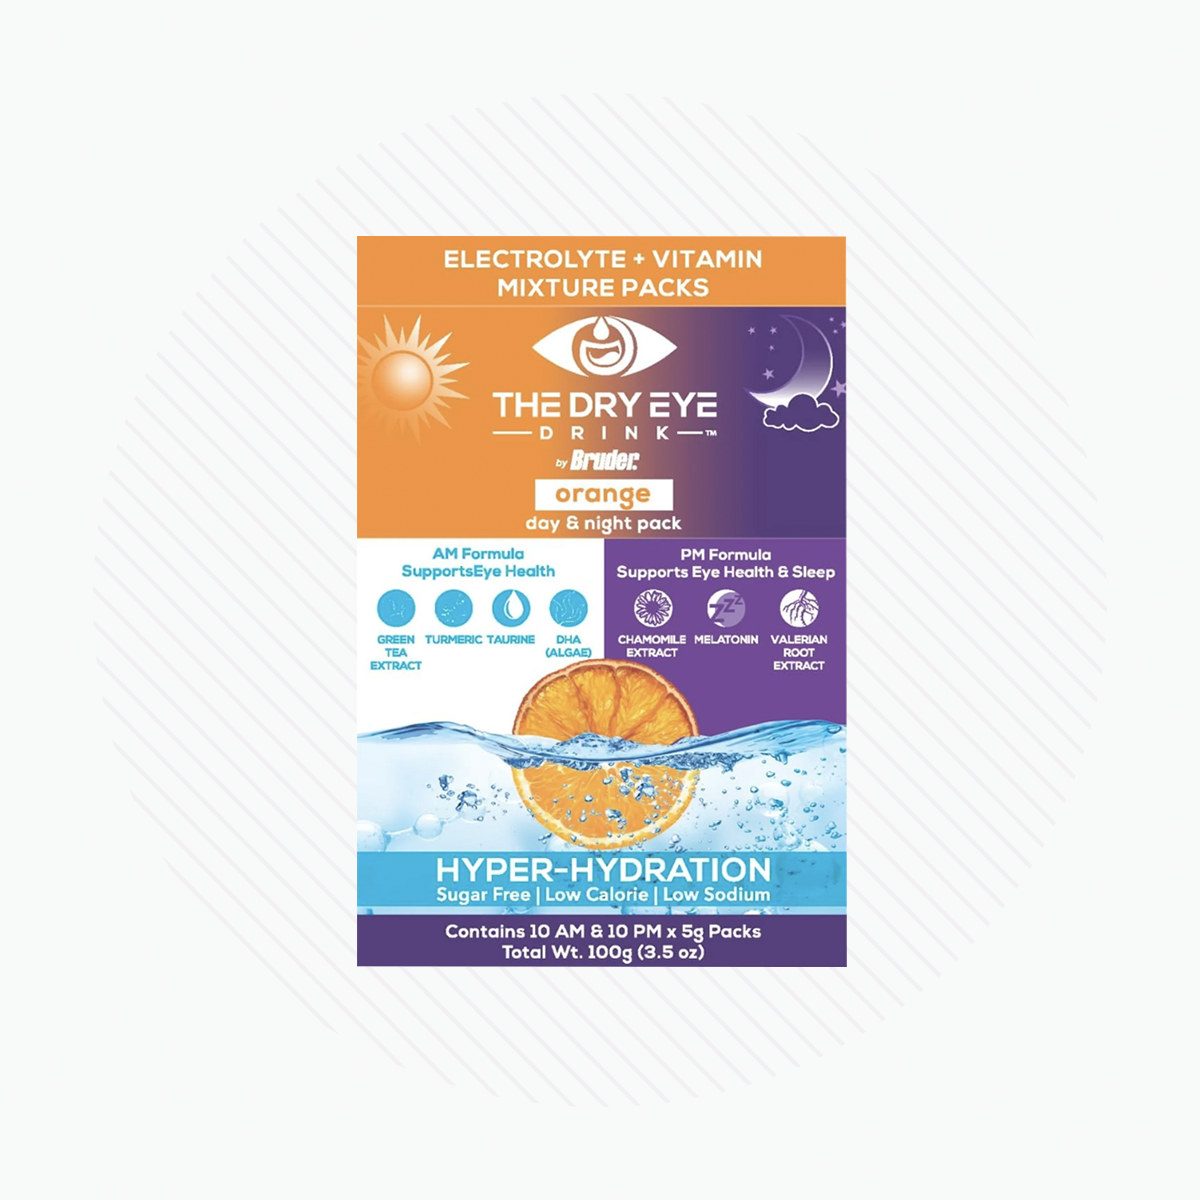 The Dry Eye Drink the Ultimate Hydration for Dry Eyes, Sugar-Free Electrolyte Powder Packets, Blended with Vitamins, Green Tea, Turmeric, Taurine, and Omega 3 (20 Packets of Orange AM/PM)